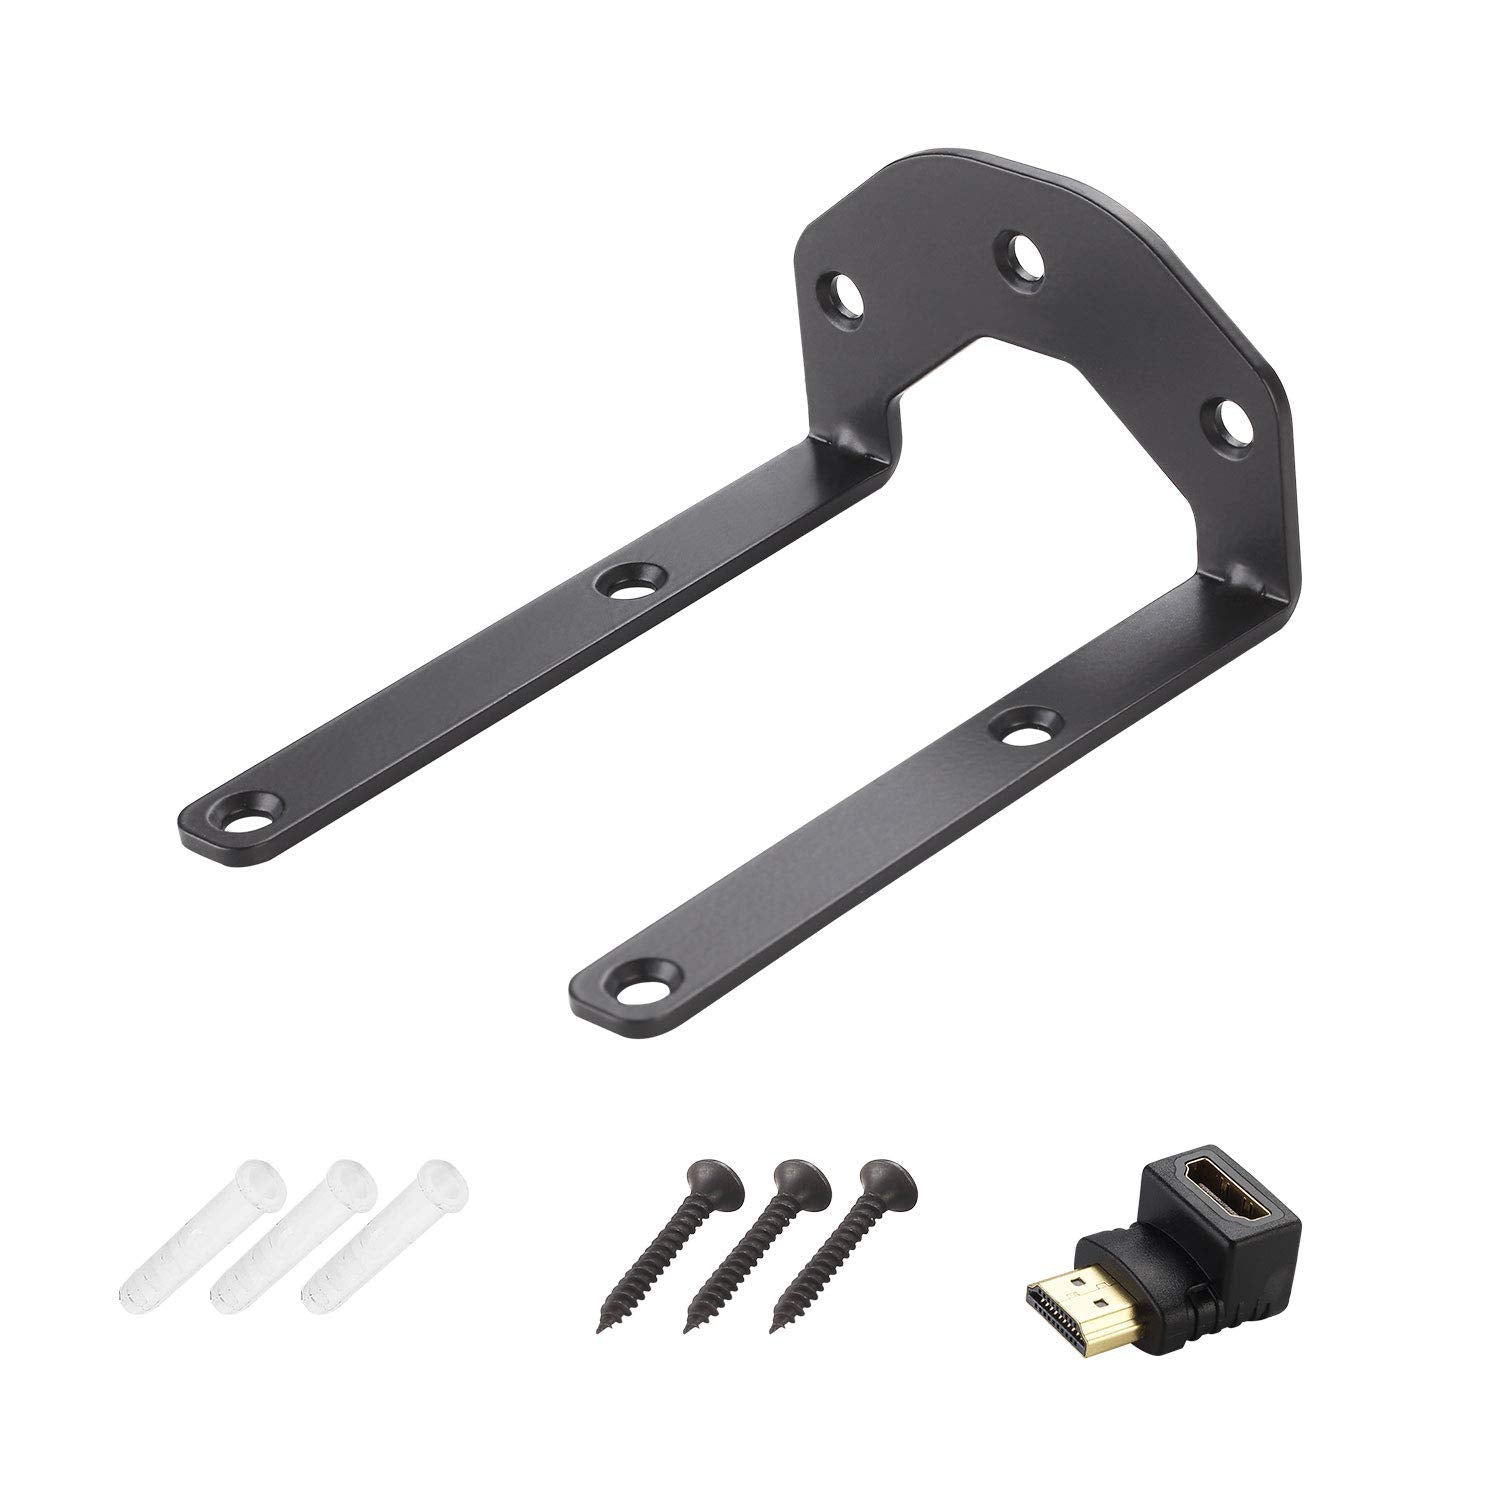  Dot Genie Easy Hanging Fire TV Cube Wall Mount (Fits 1st & 2nd  Gen and New 3rd Gen Fire TV Cube), Updated for More Support, Totally  Hides Cords